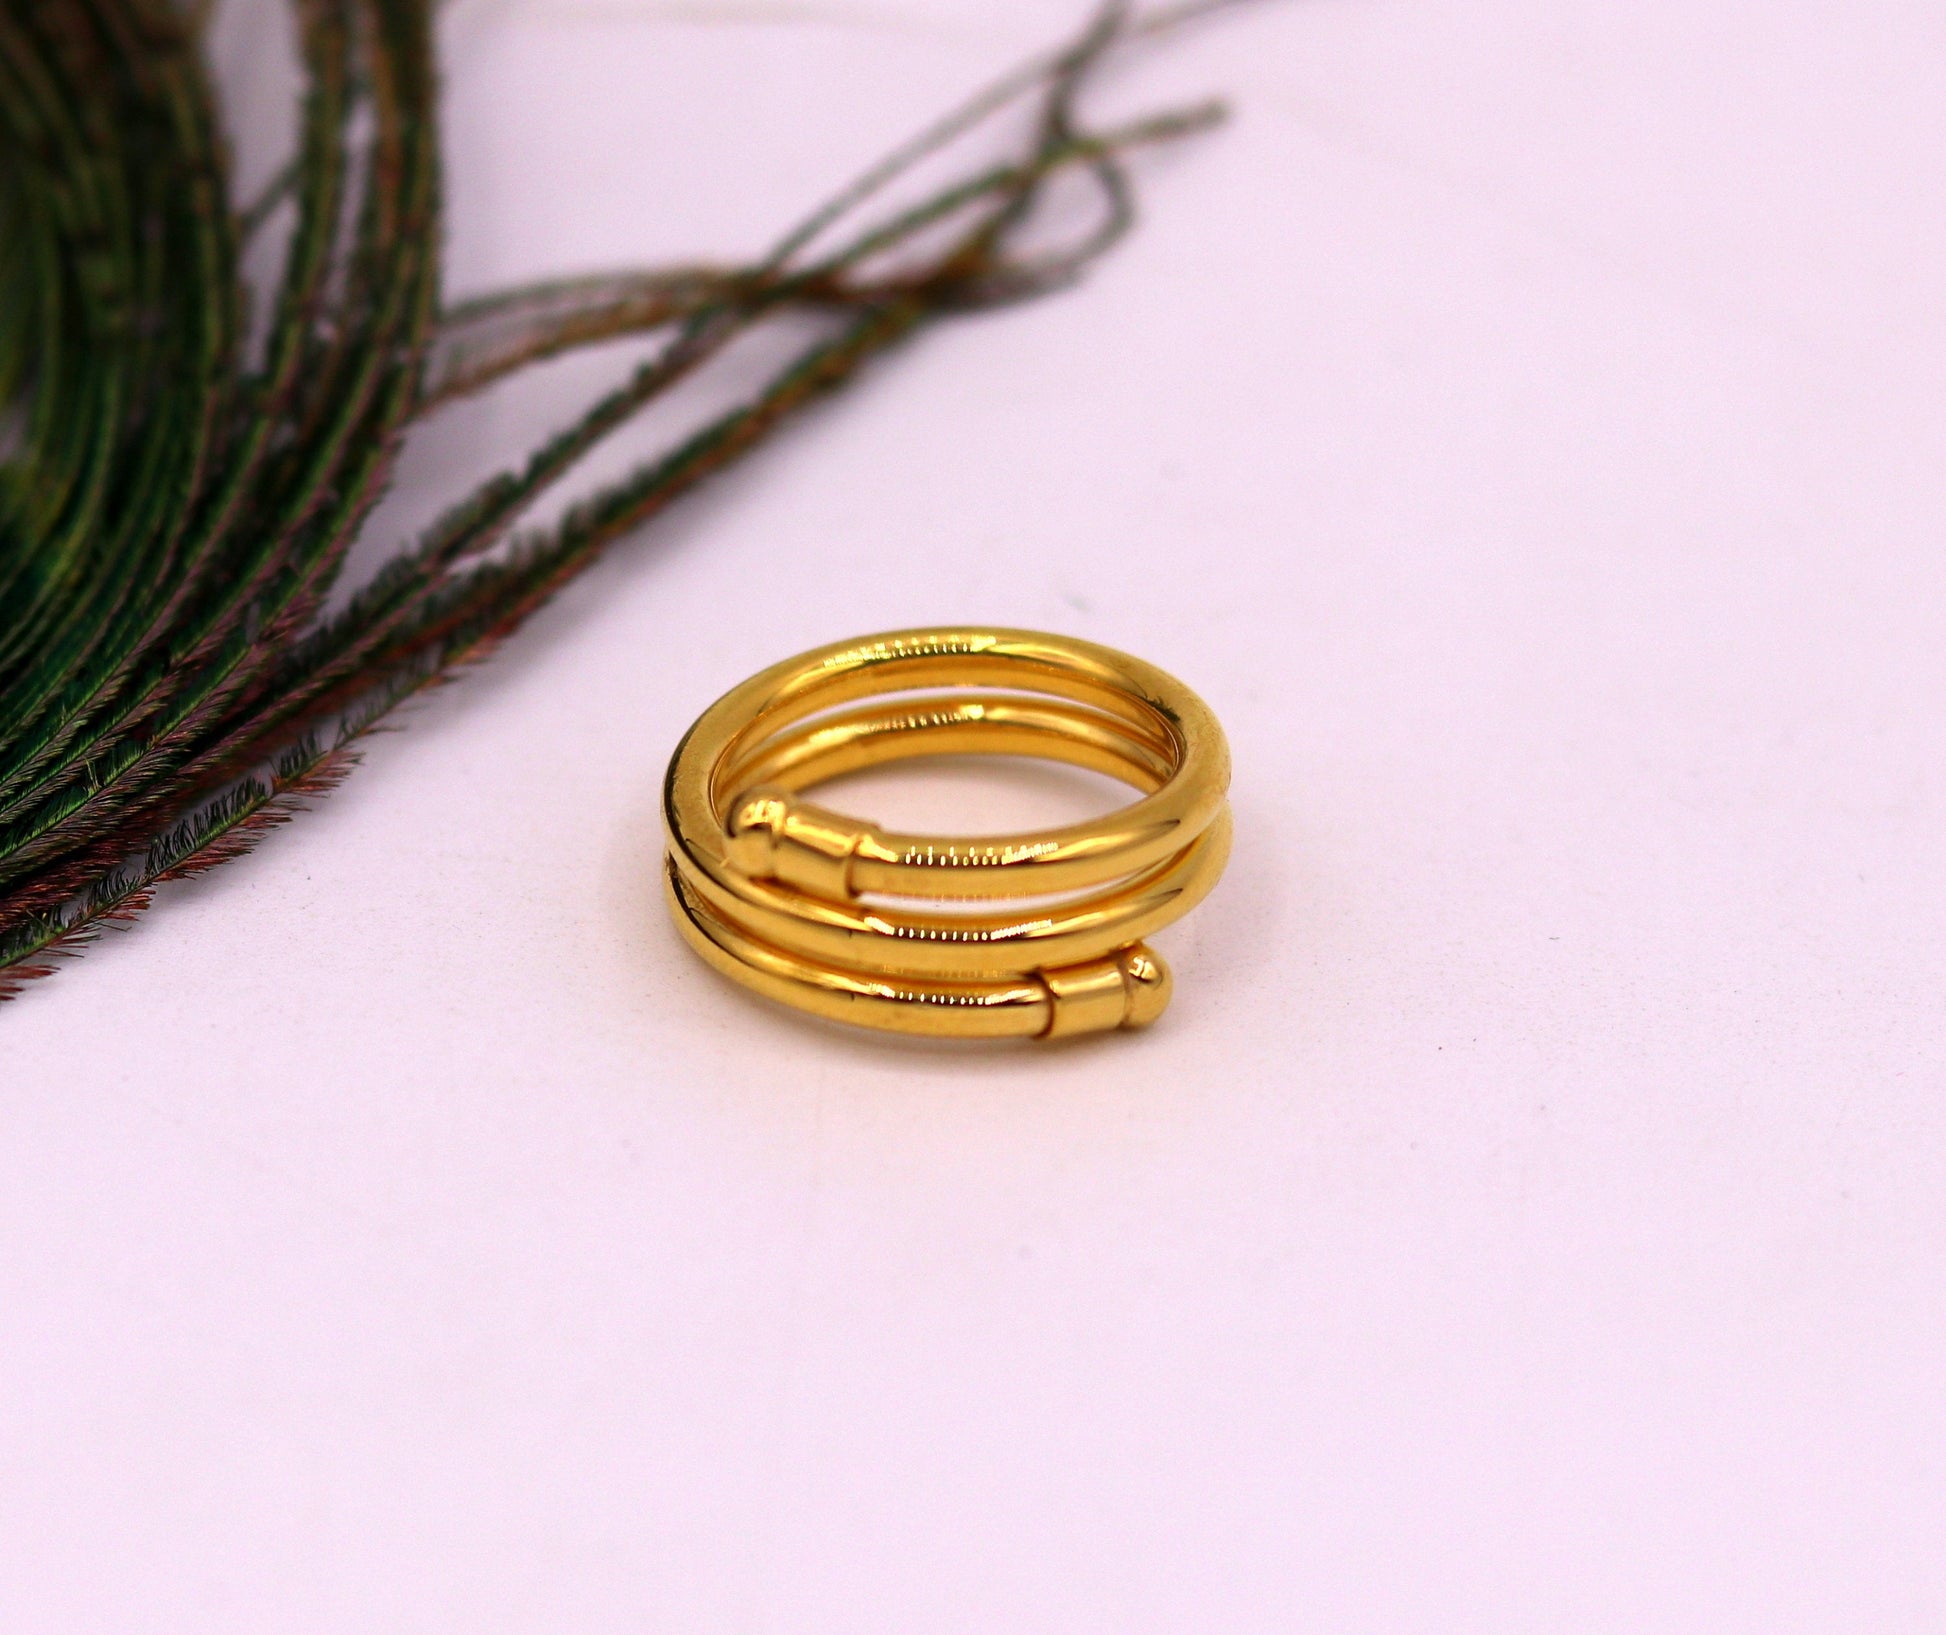 Solid spiral ring 22kt yellow gold handmade fabulous design all sizes ring band for unisex gifting jewelry from india - TRIBAL ORNAMENTS